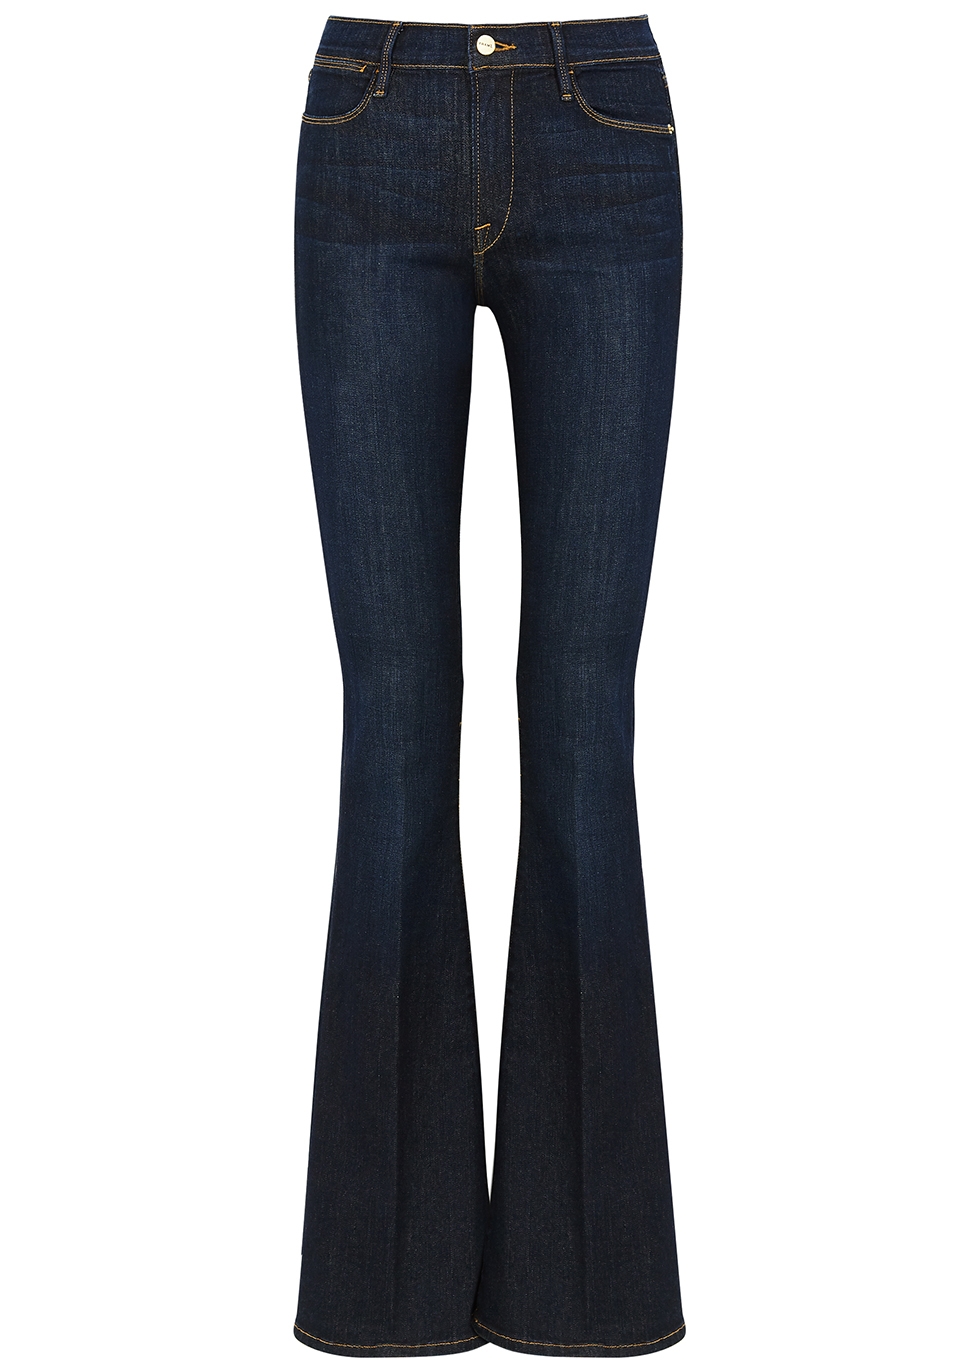 Le High Flare dark blue jeans